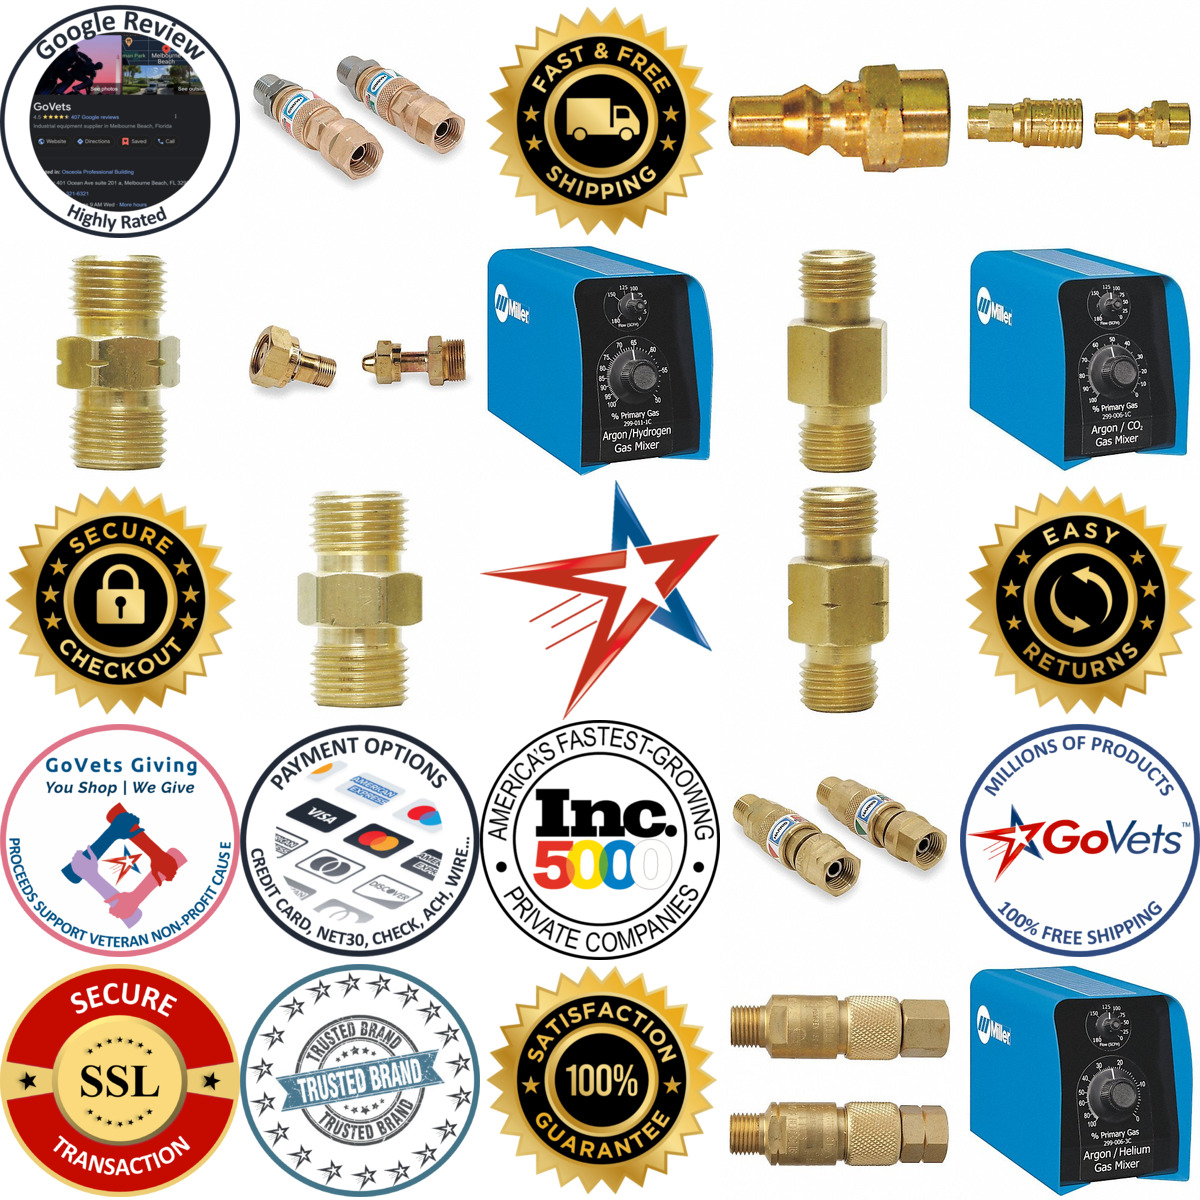 A selection of Gas Welder Fittings products on GoVets